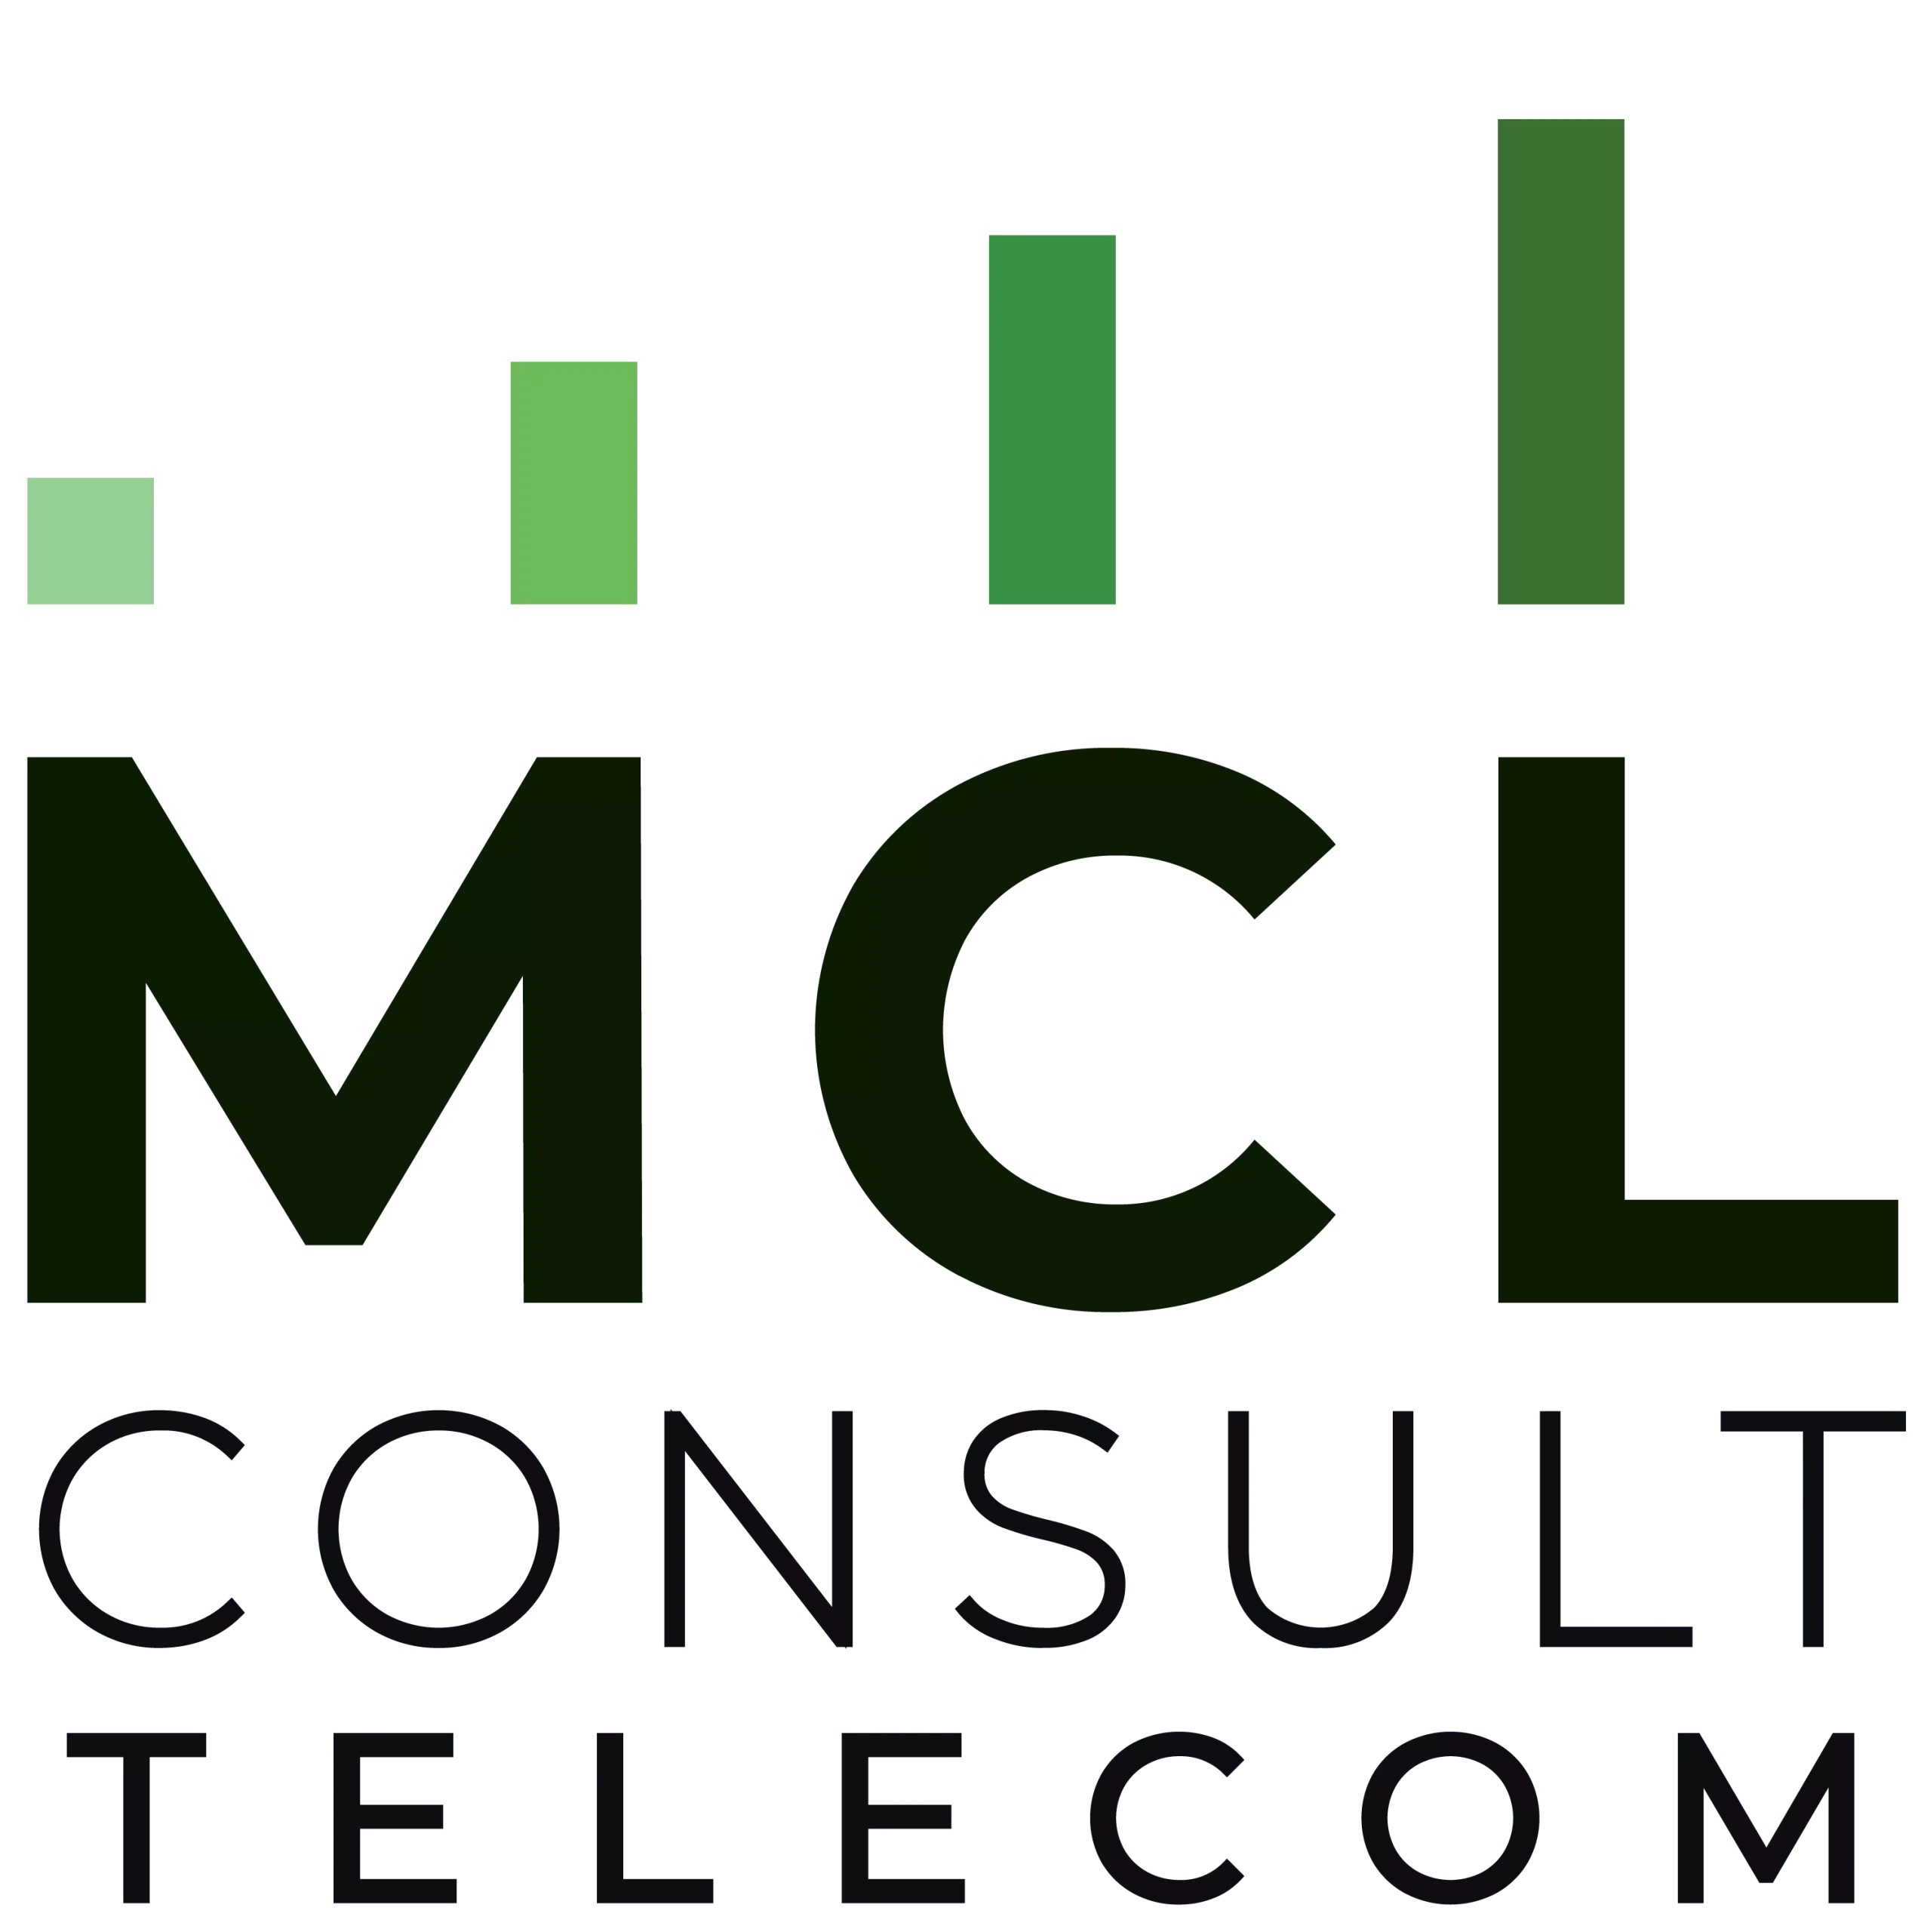 MCL Consult Telecom Black scaled